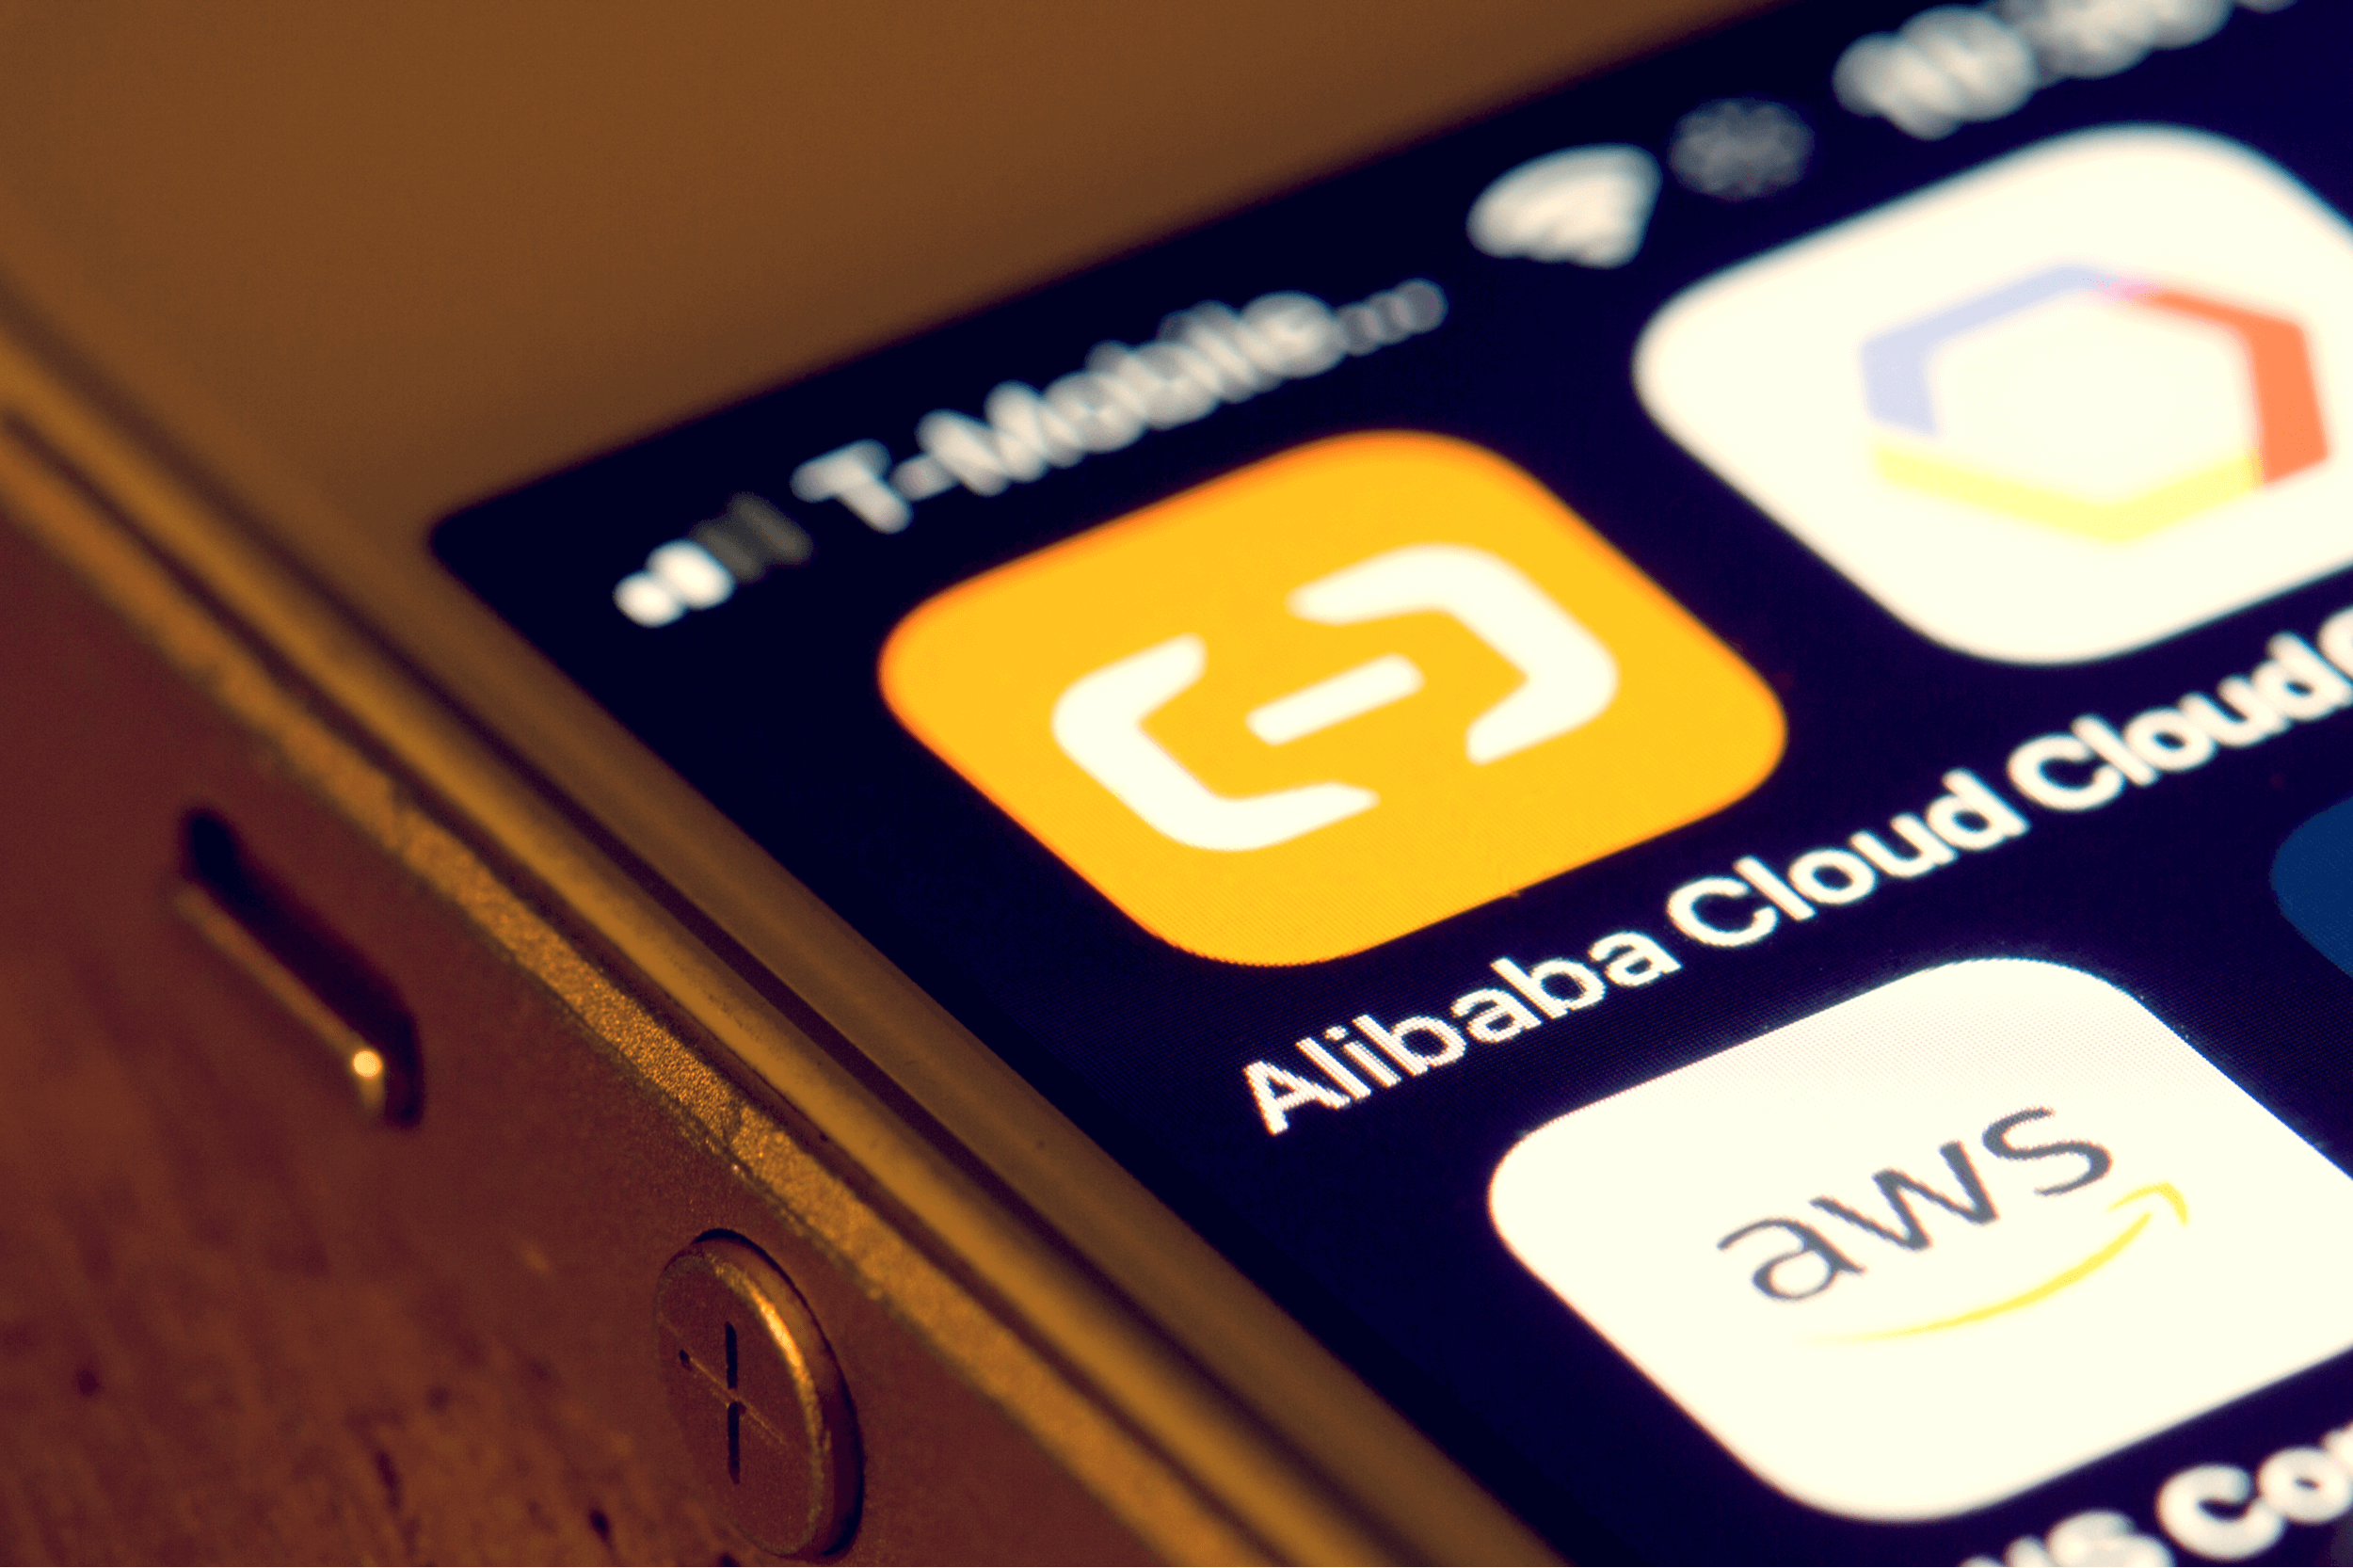 Alibaba Cloud mobile app icon closeup. Alibaba Cloud, also known as Aliyun, is a Chinese cloud computing company, a subsidiary of Alibaba Group